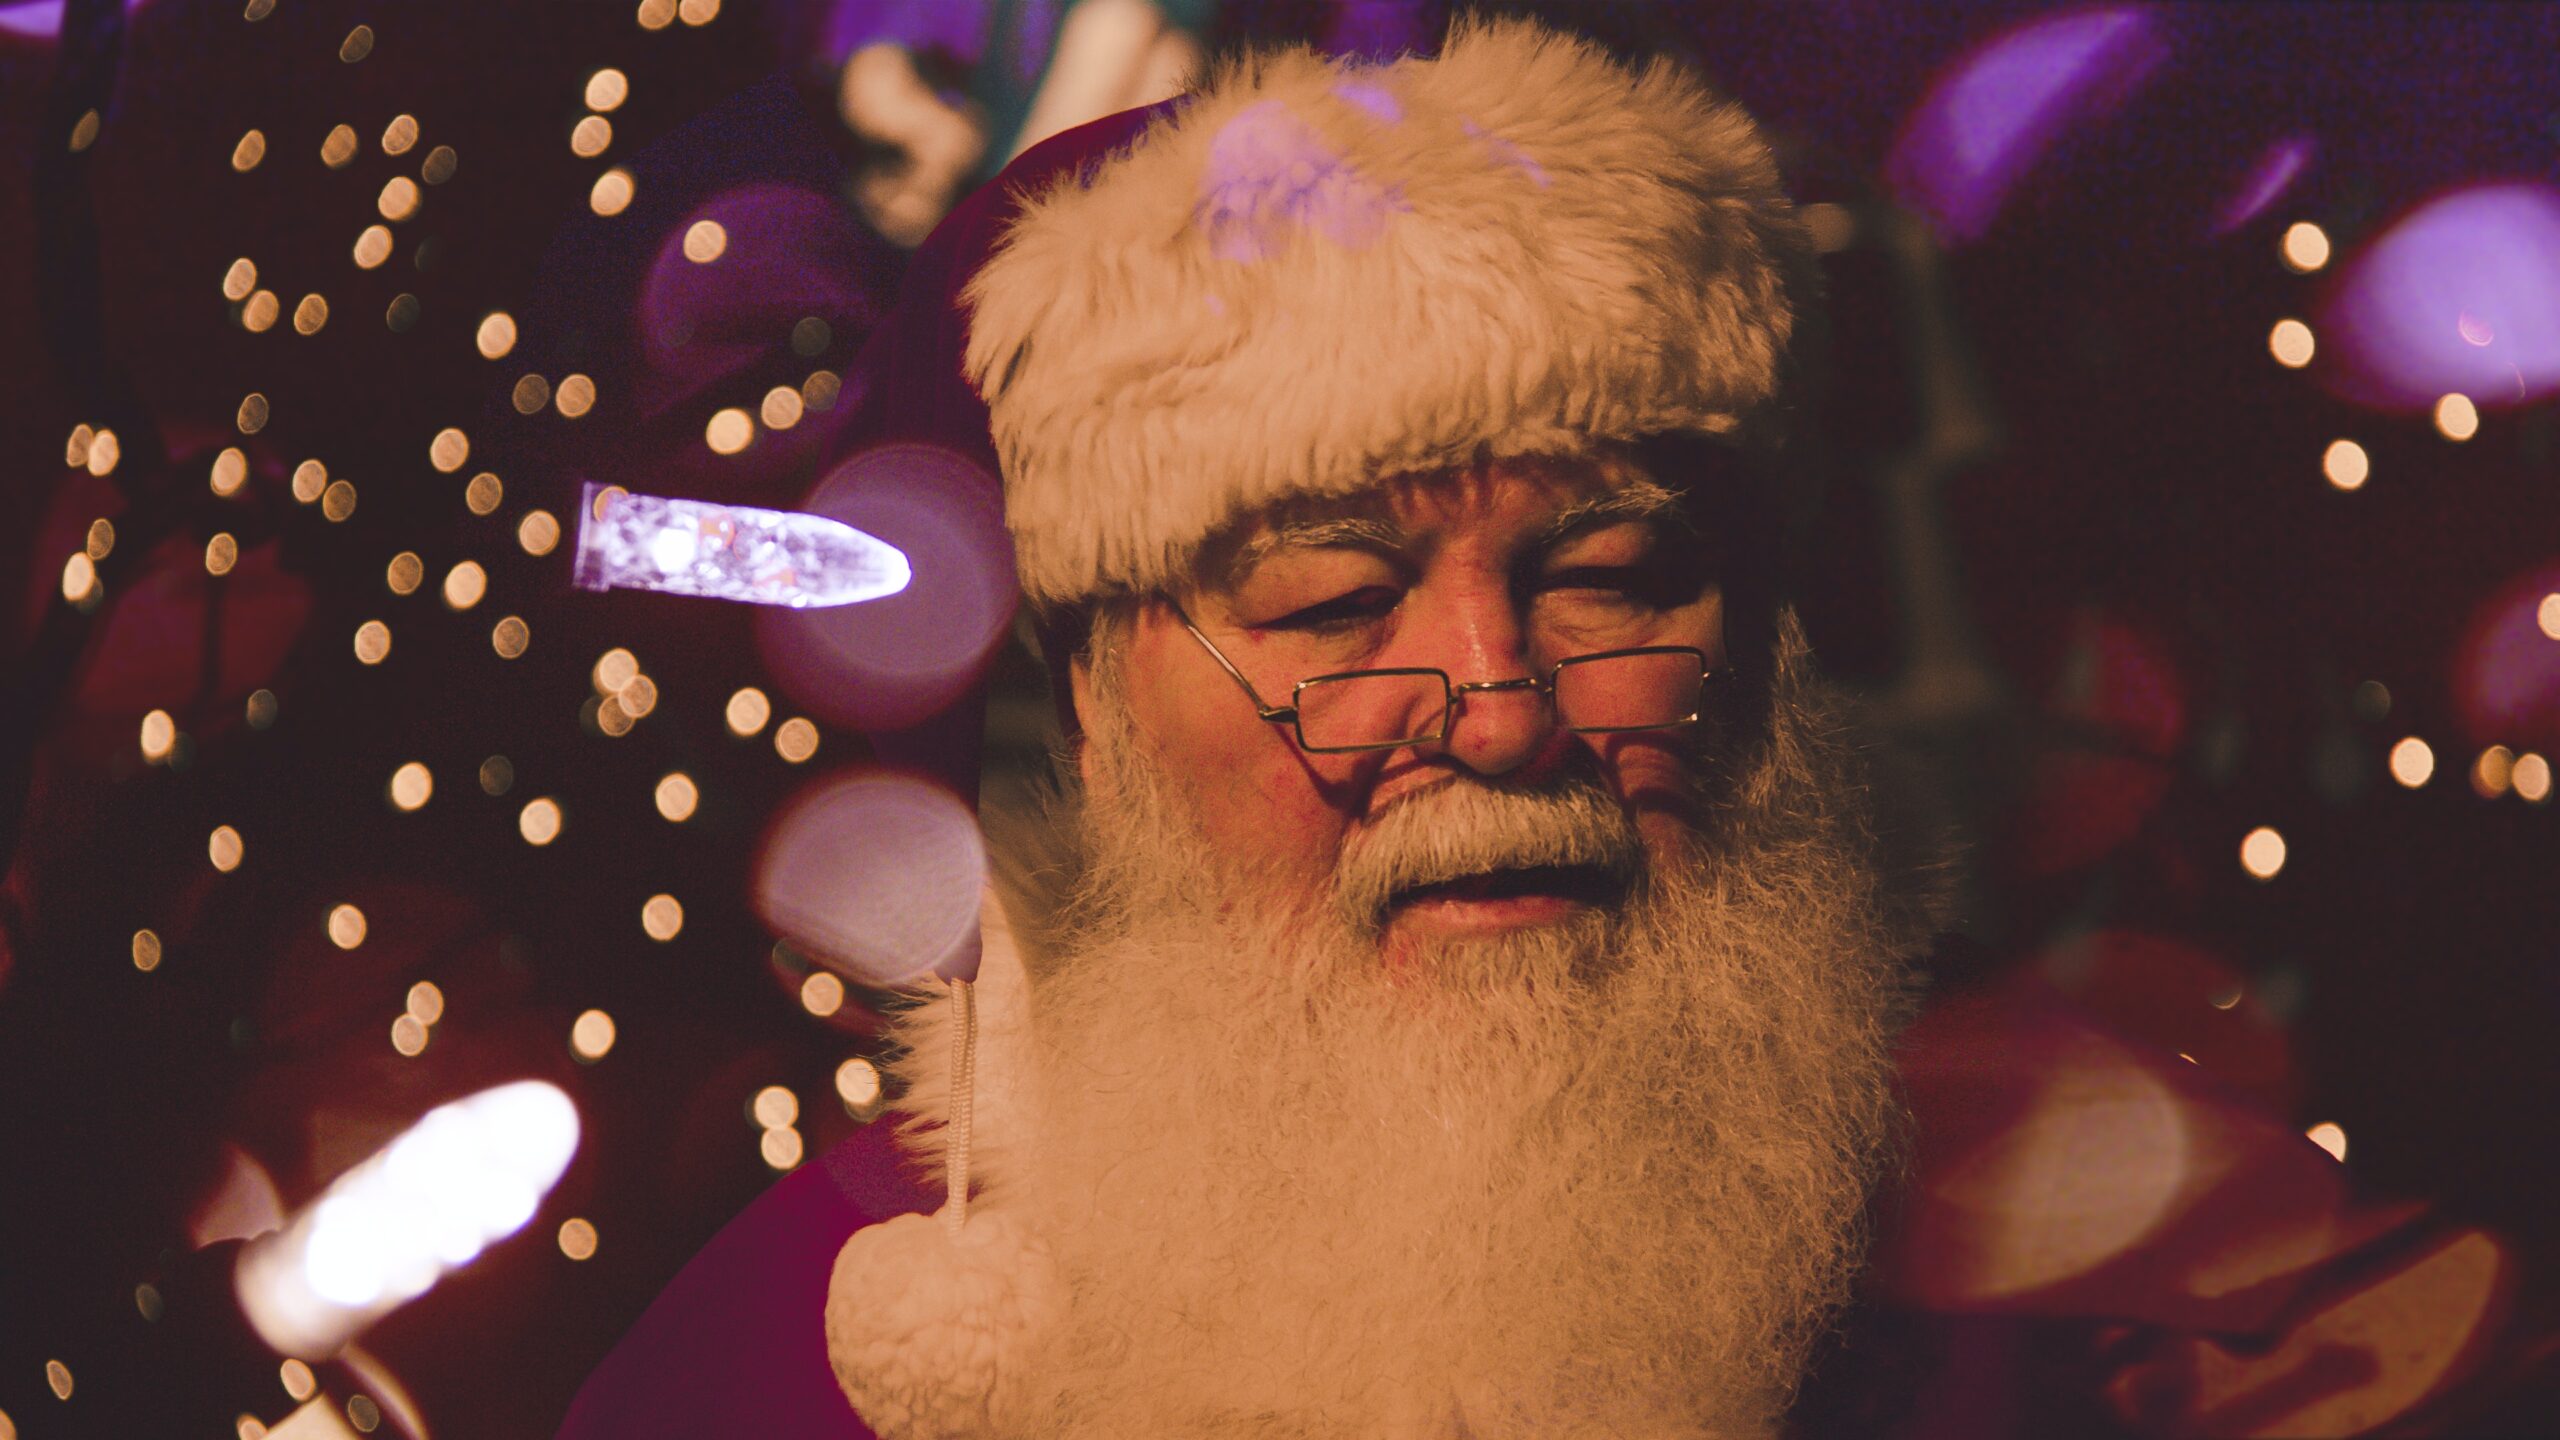 Is Santa Clause Eligible for Life Insurance?